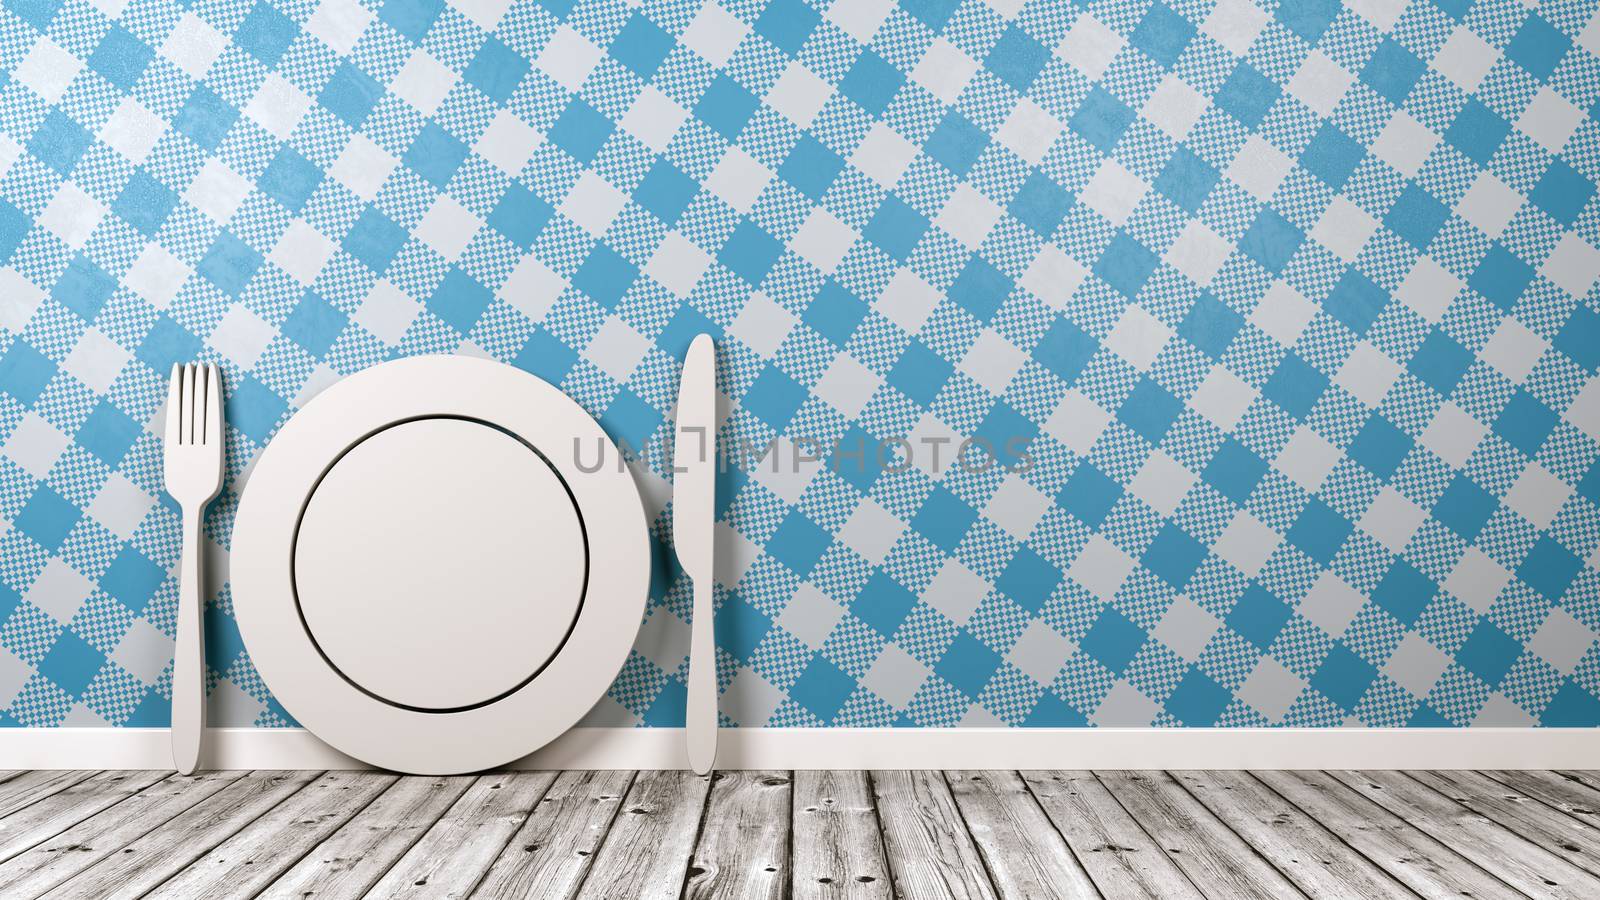 White Kitchenware 3D Shape on Wooden Floor Against Table Cloth Style Blue Wall with Copy Space 3D Illustration